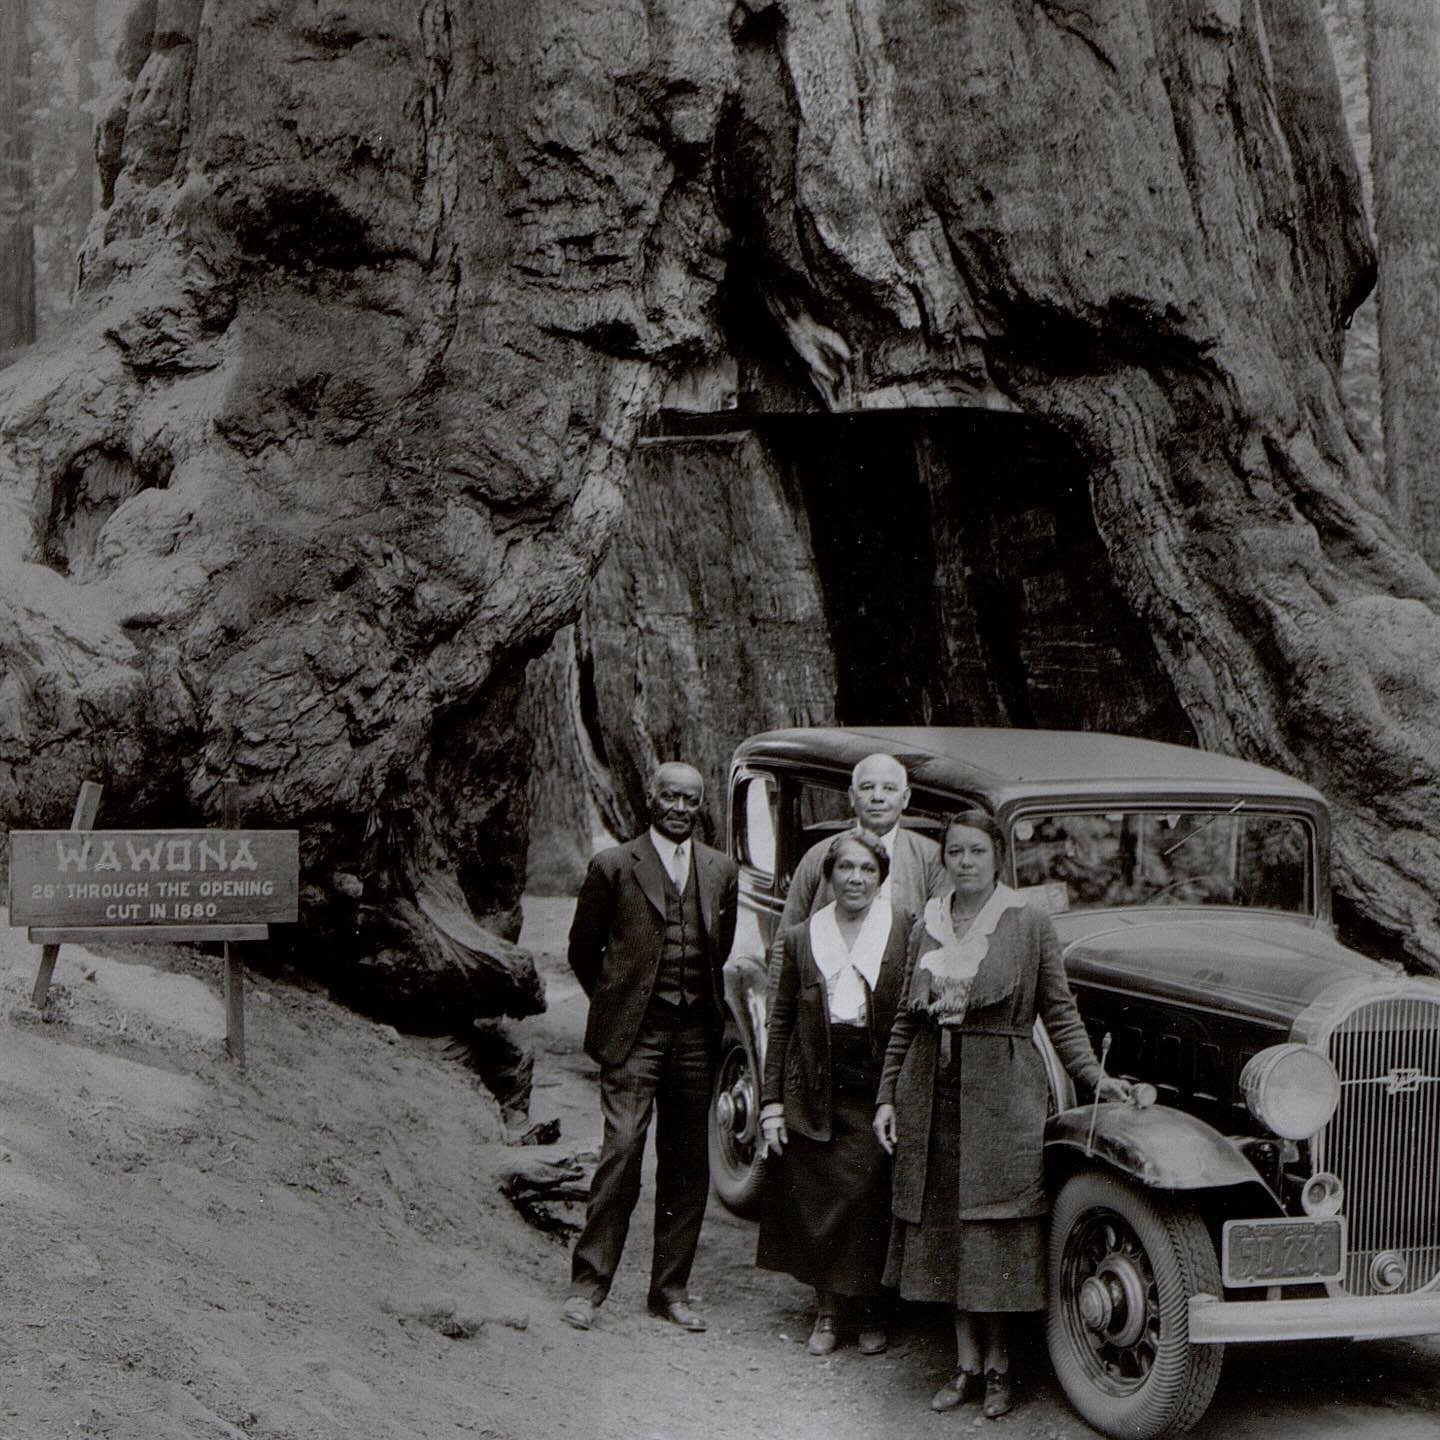 c 1920-1930, outdoor group portrait of Titus Alexander (center) with his wife, Mary Alexander (right) at the Wawona Tree, Yosemite National Park 
 
{*y&rsquo;aaaall! It&rsquo;s a good day to have a good day and this just made mine 🌲🪩🏔️🌞 I haven&r